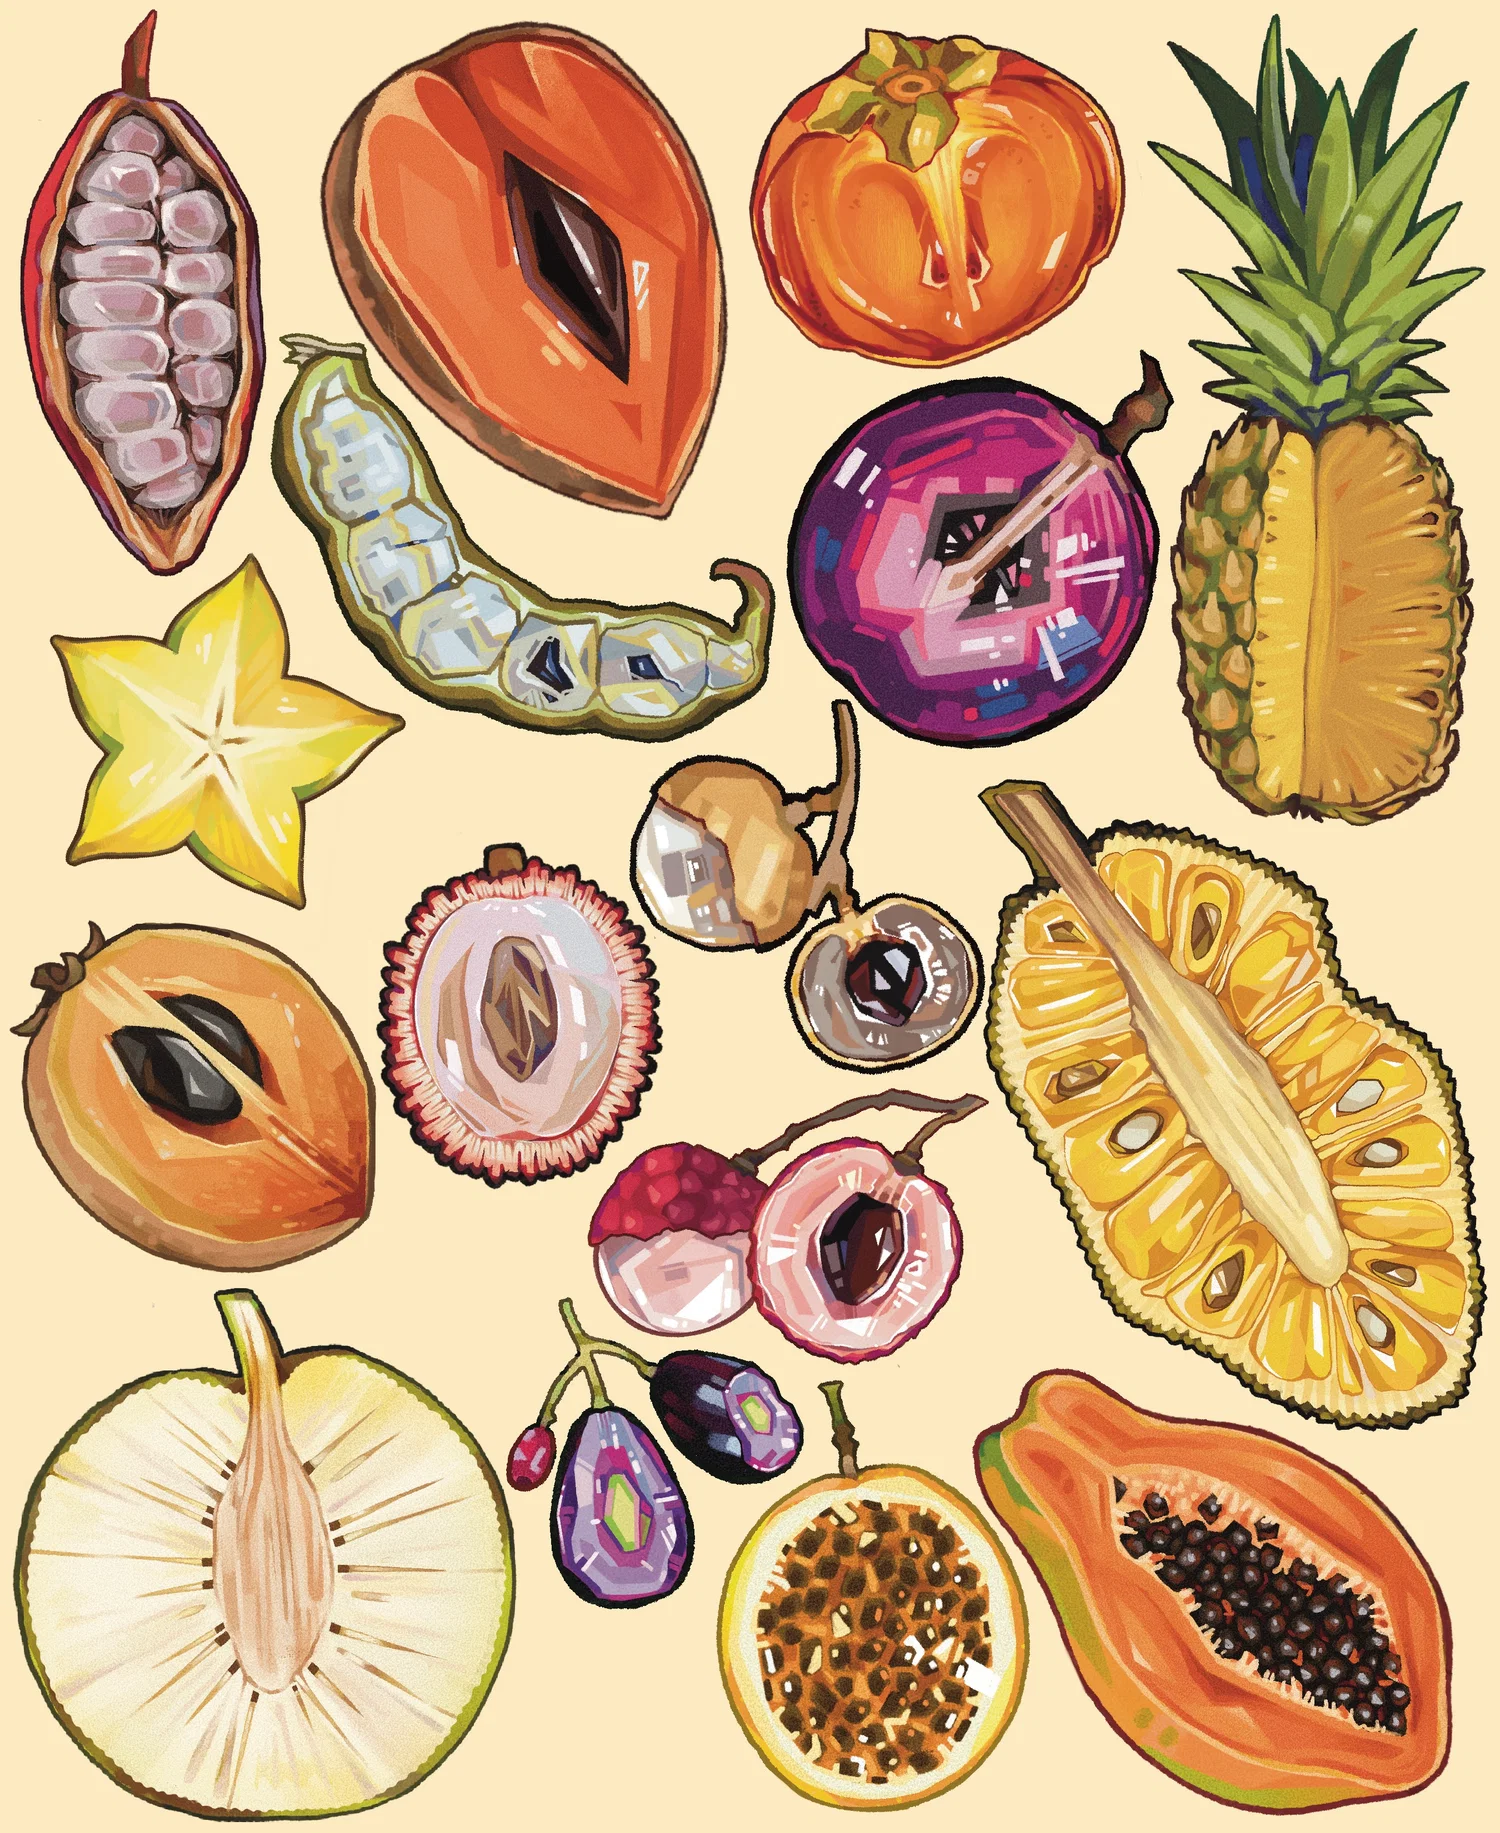 Illustrations of various fruit found in Hawai'i. They are drawn in a style with graphic bright coloring and are all collaged together. 